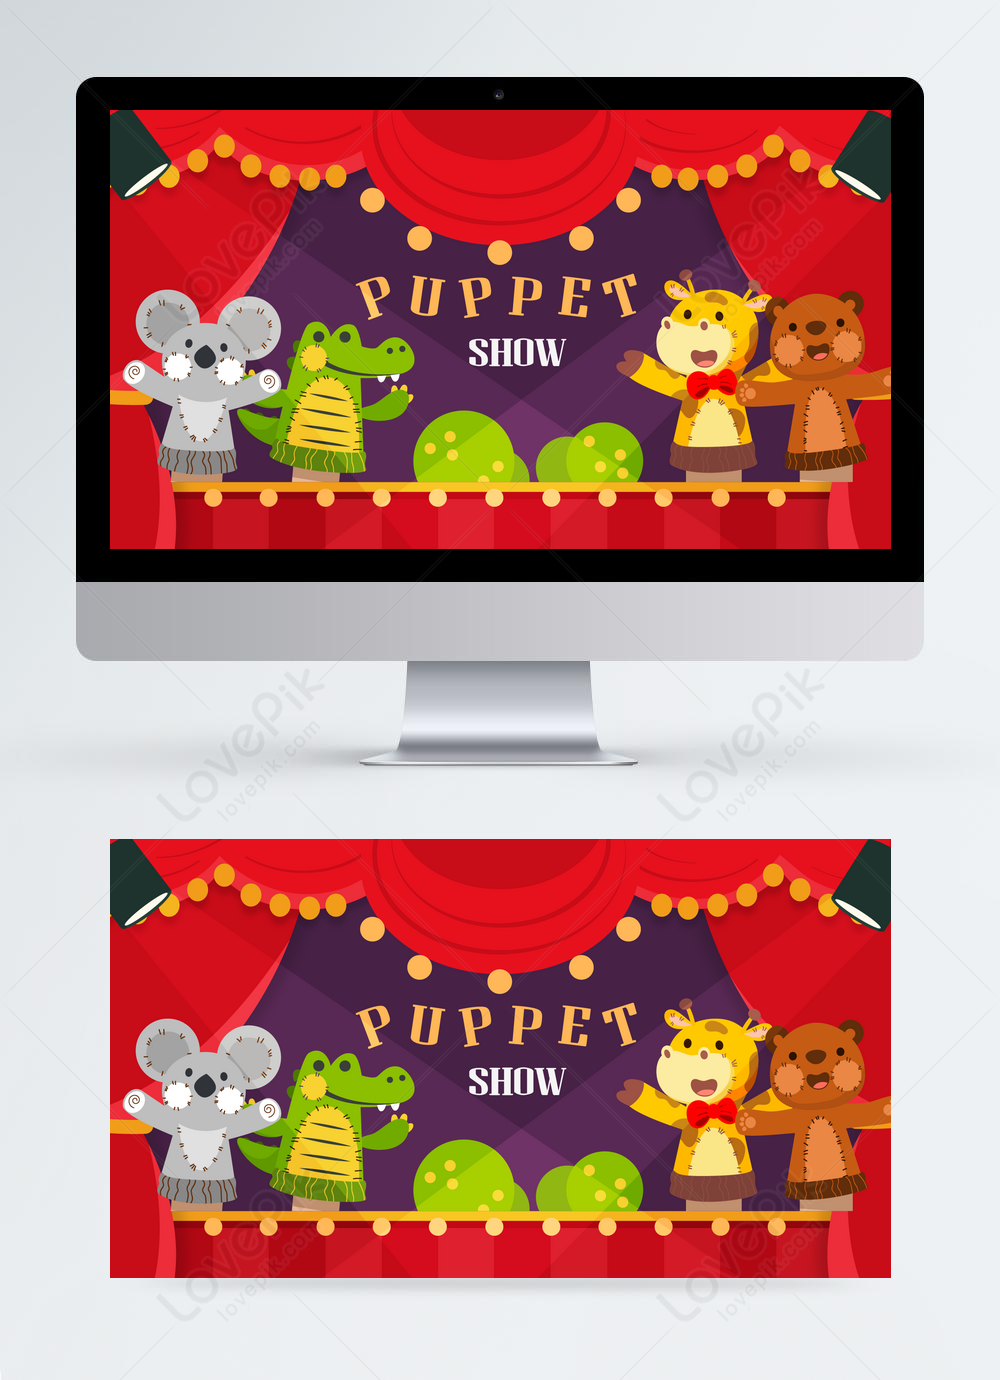 Childrens puppet show animal party web ui banner template image_picture  free download 